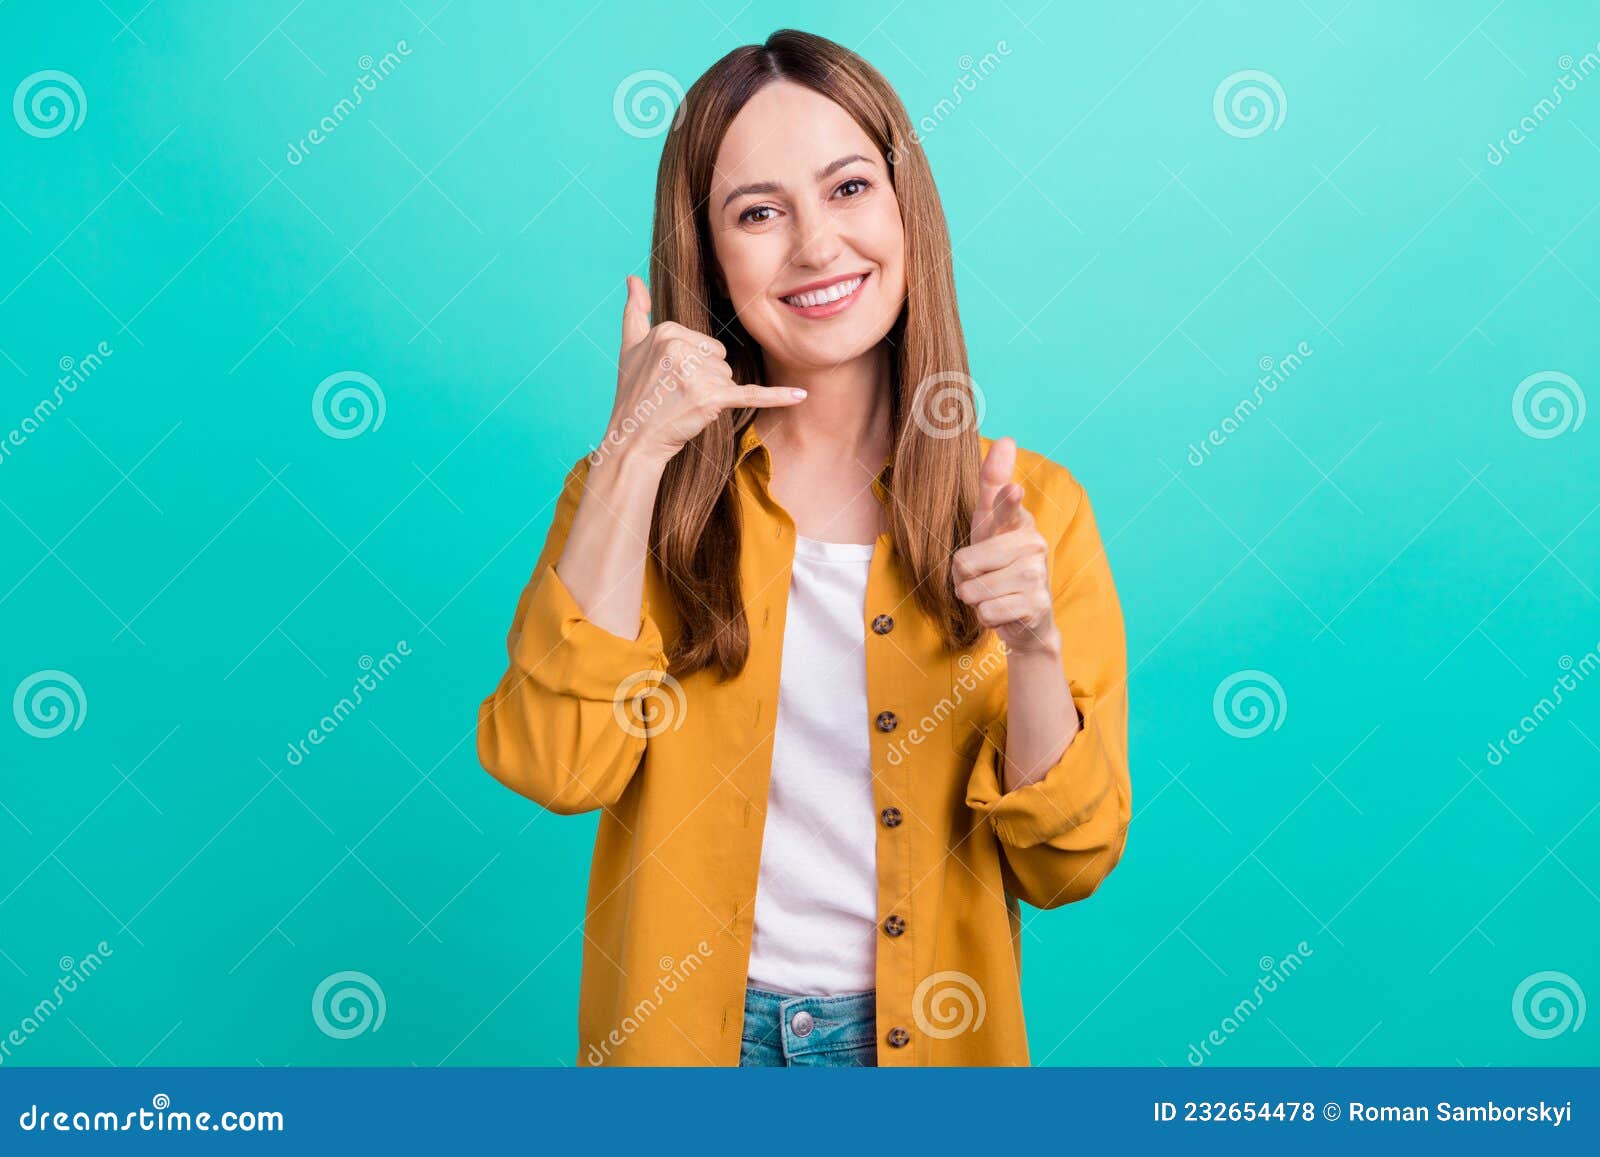 Photo of Pretty Cute Young Woman Dressed Yellow Shirt Smiling Pointing ...